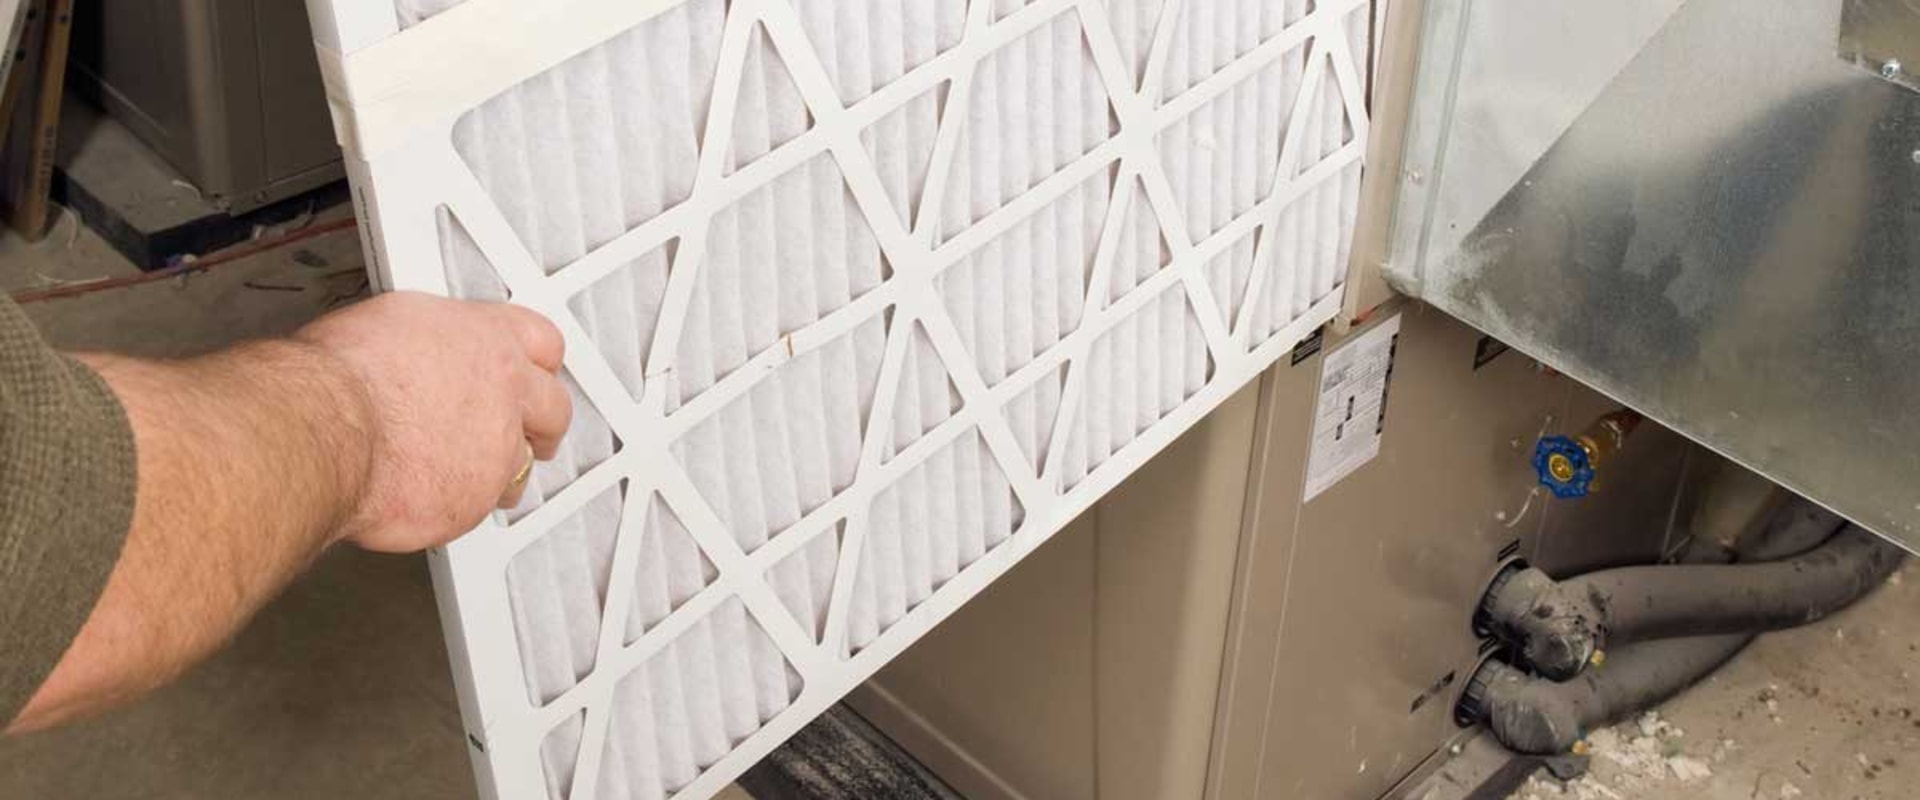 Why MERV 11 HVAC Furnace Air Filters 12x12x1 Are a Smart Choice for Your Home